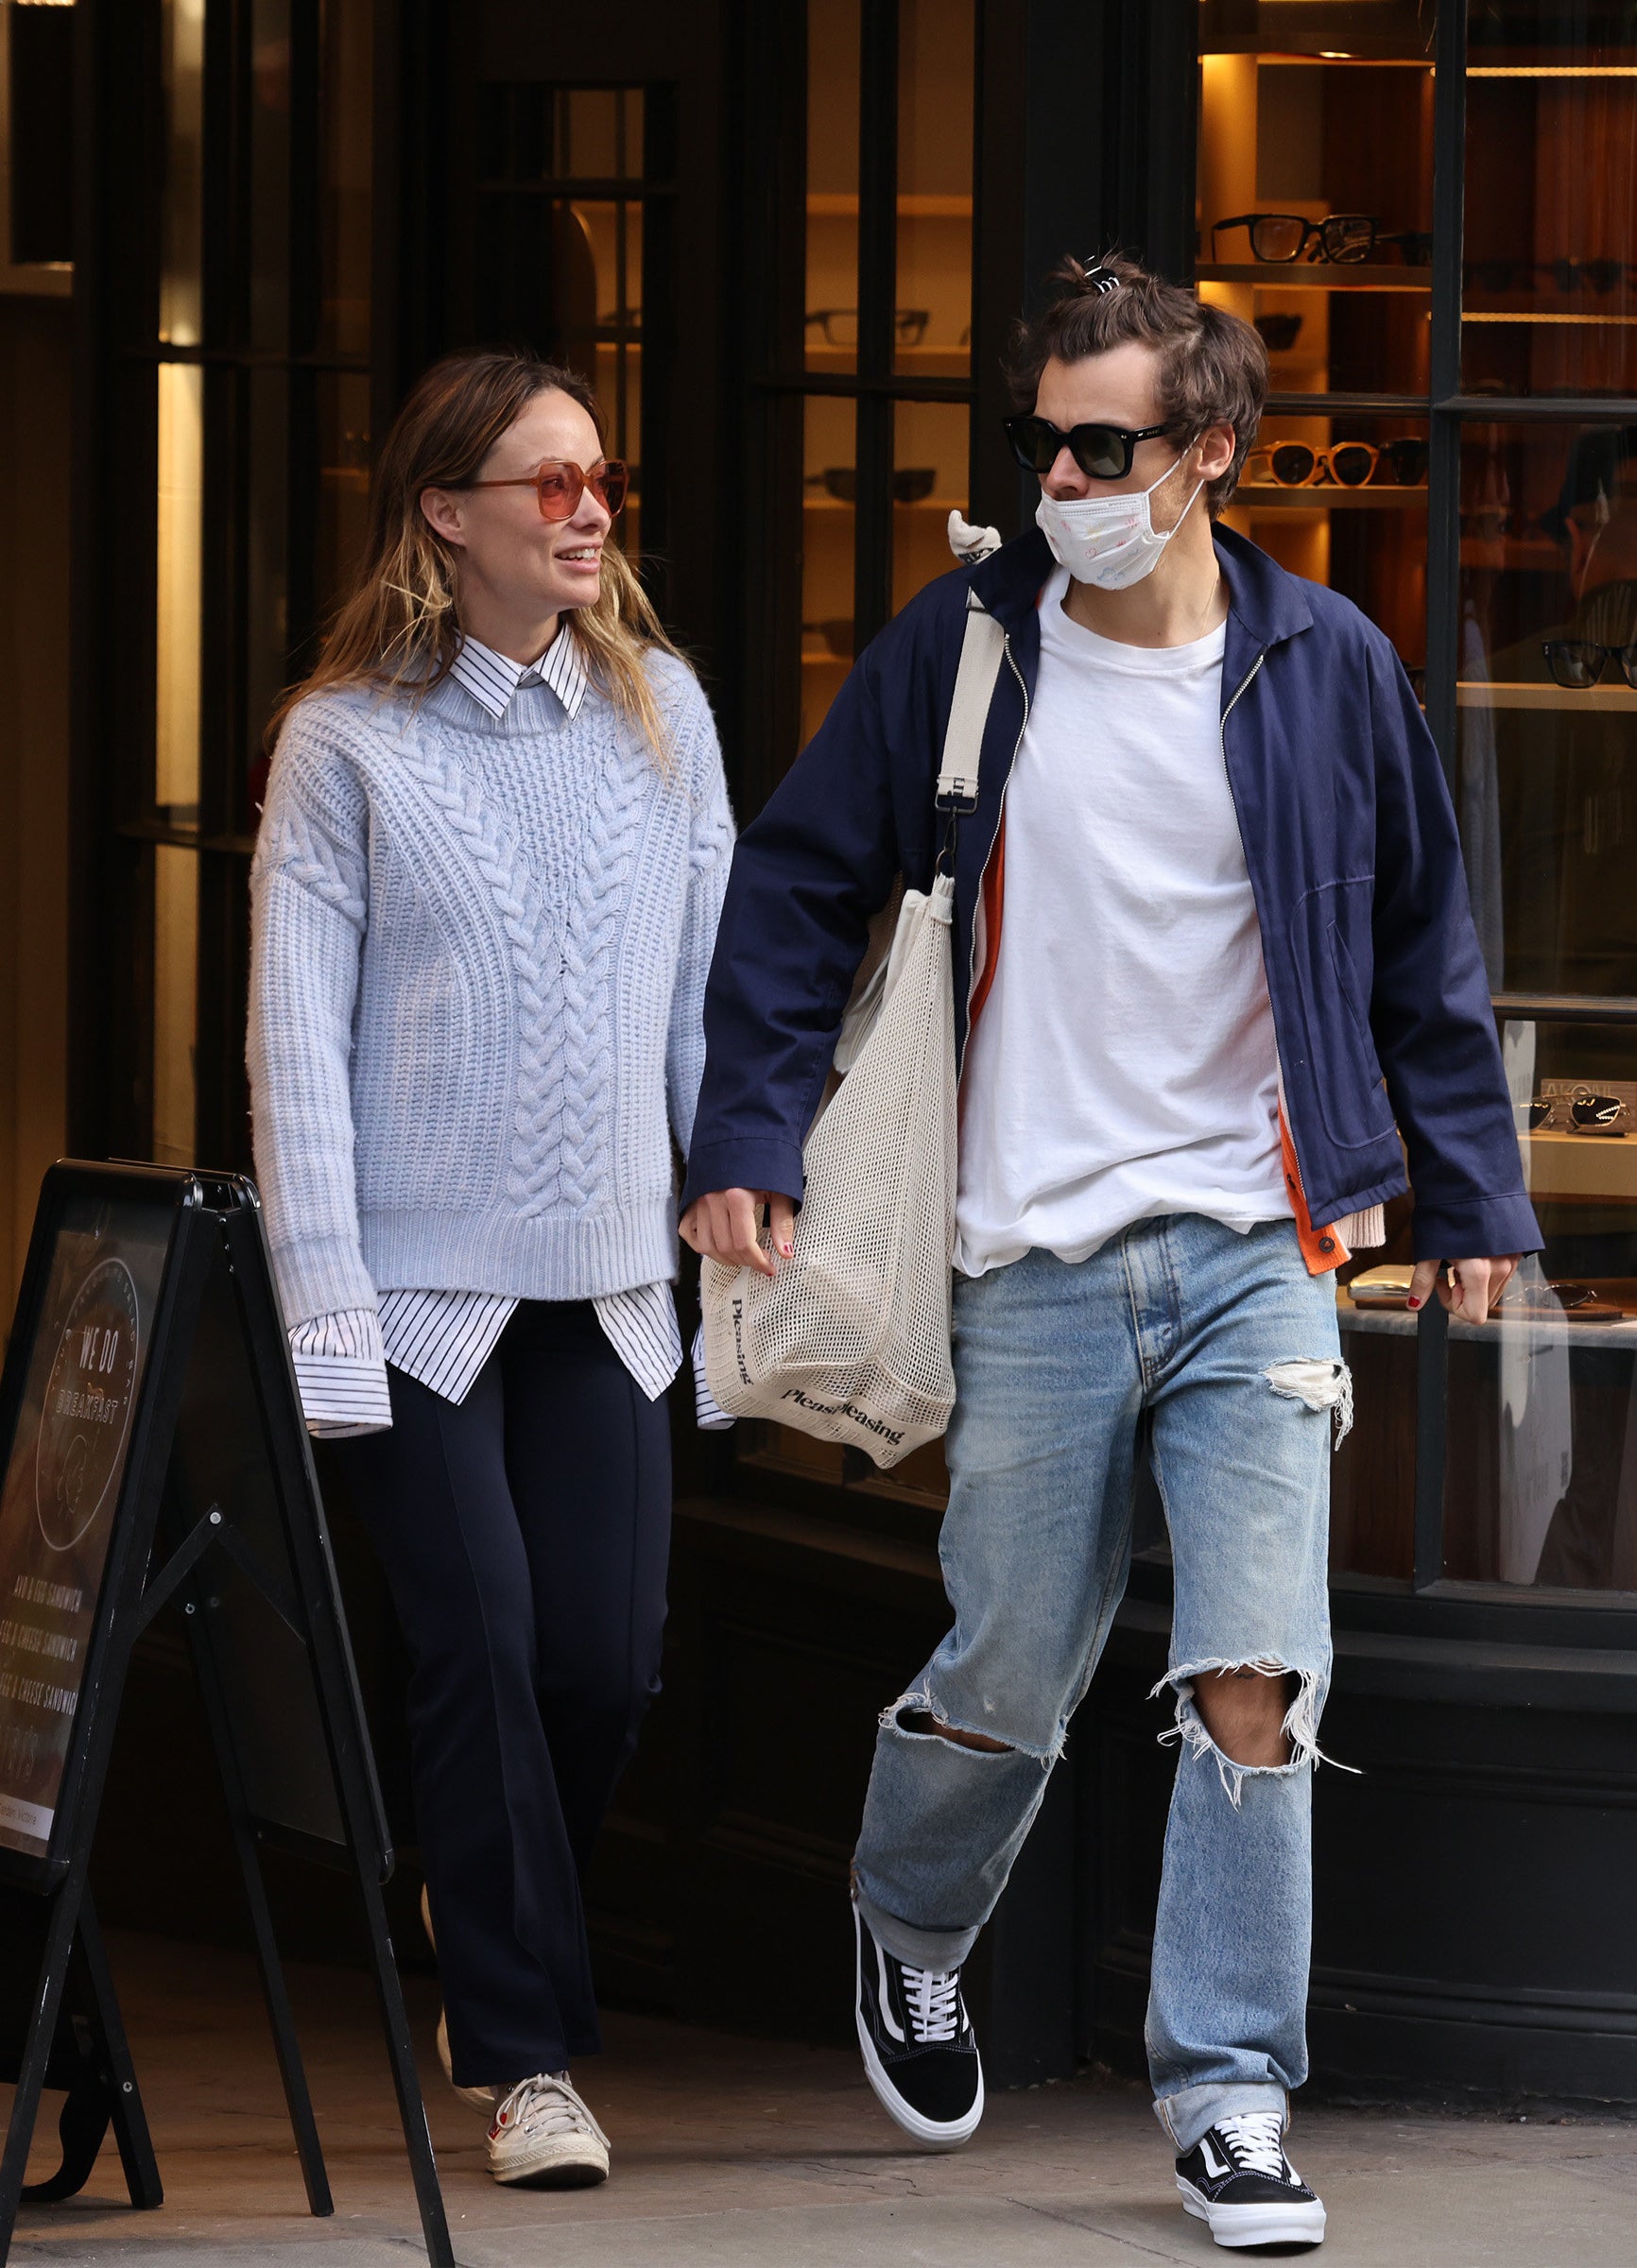 Harry Styles and Olivia Wilde leaving a restaurant